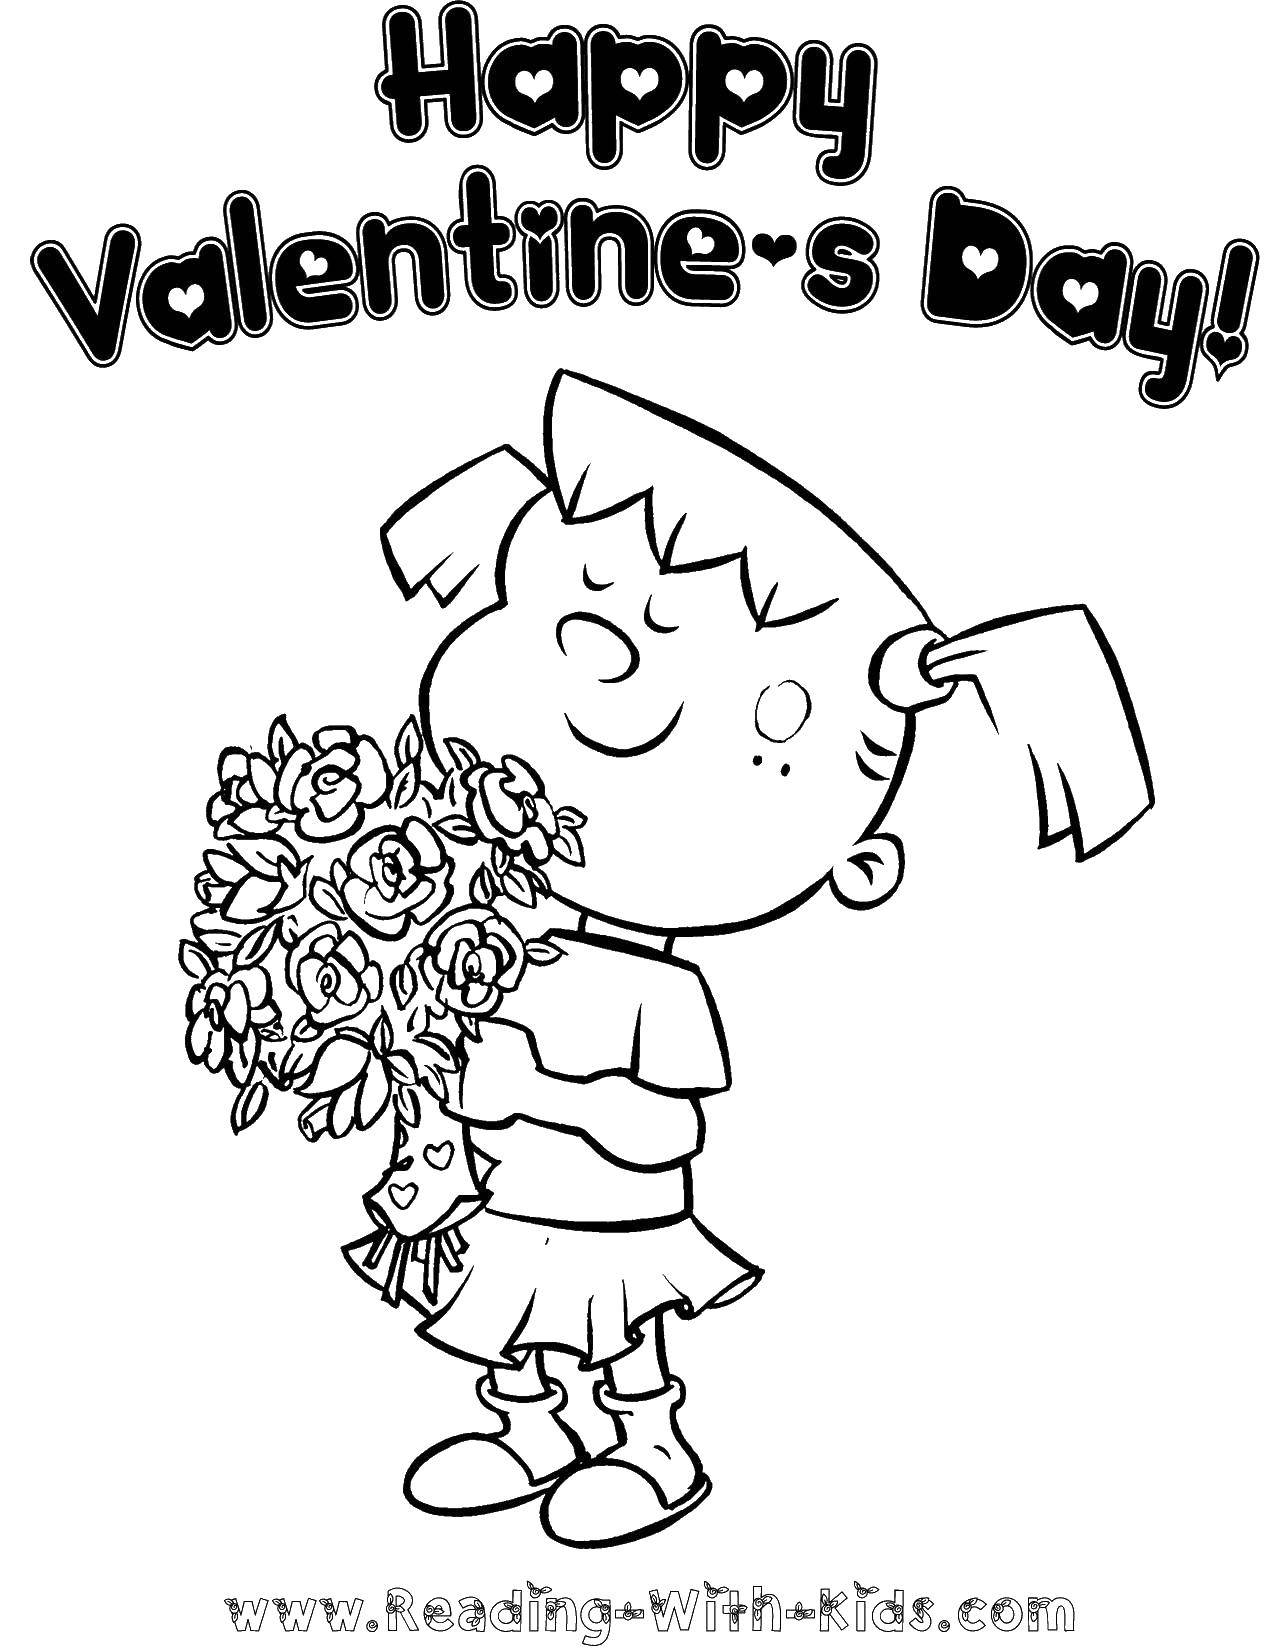 Coloring Girl with a bouquet. Category Valentines day. Tags:  girl, bouquet, flowers.